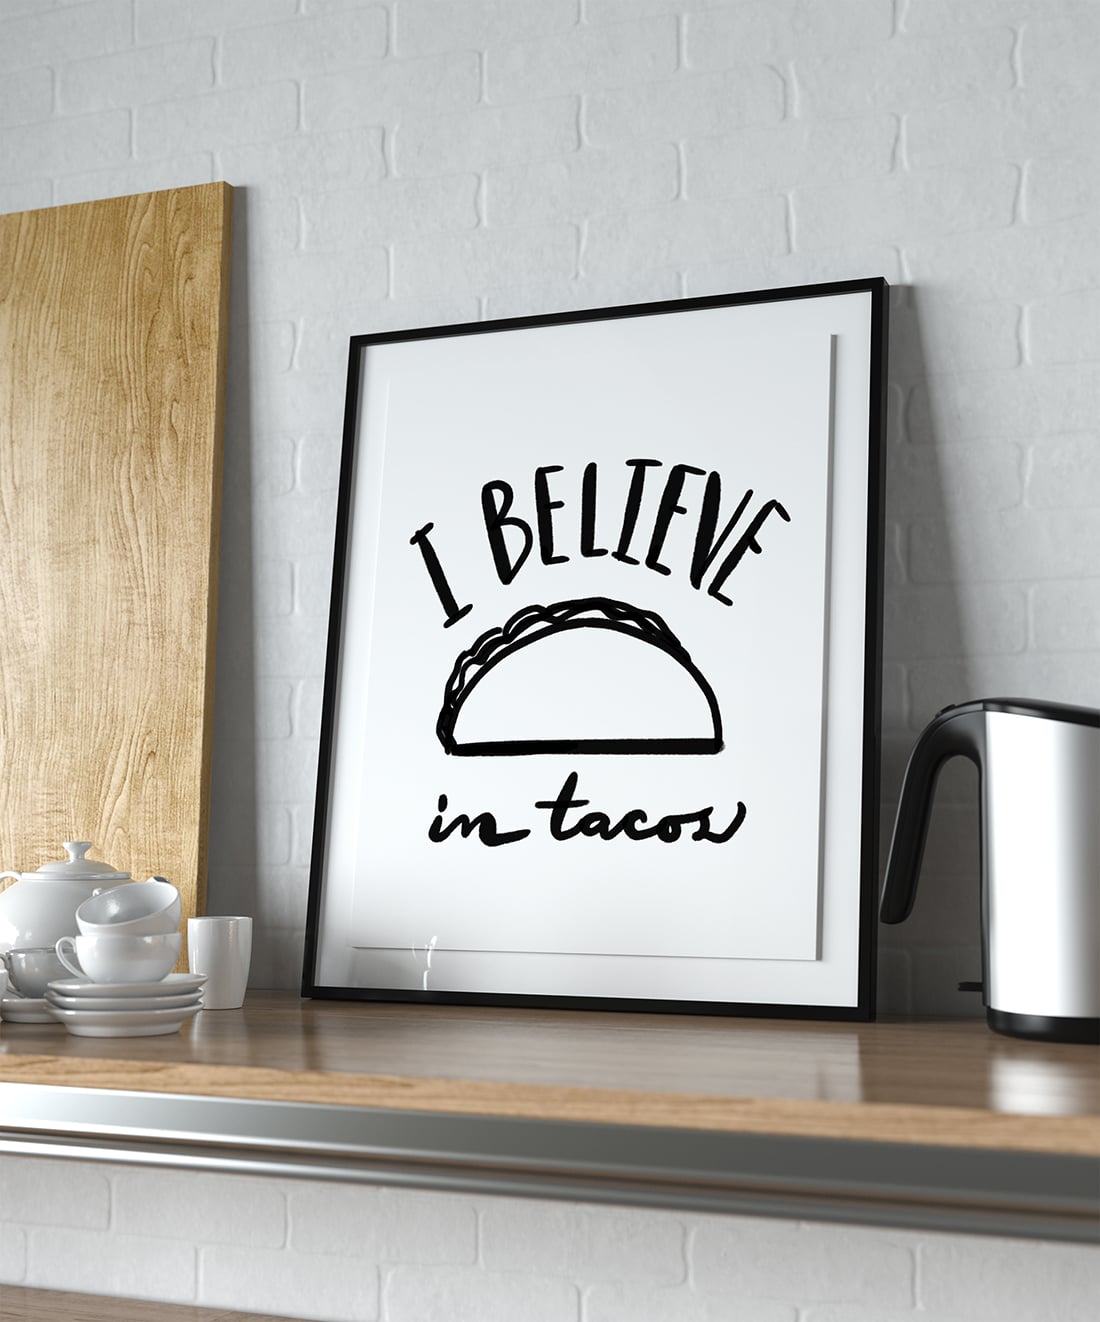 Taco Gifts: Every Day Can Be Taco Tuesday! • Little Gold Pixel 